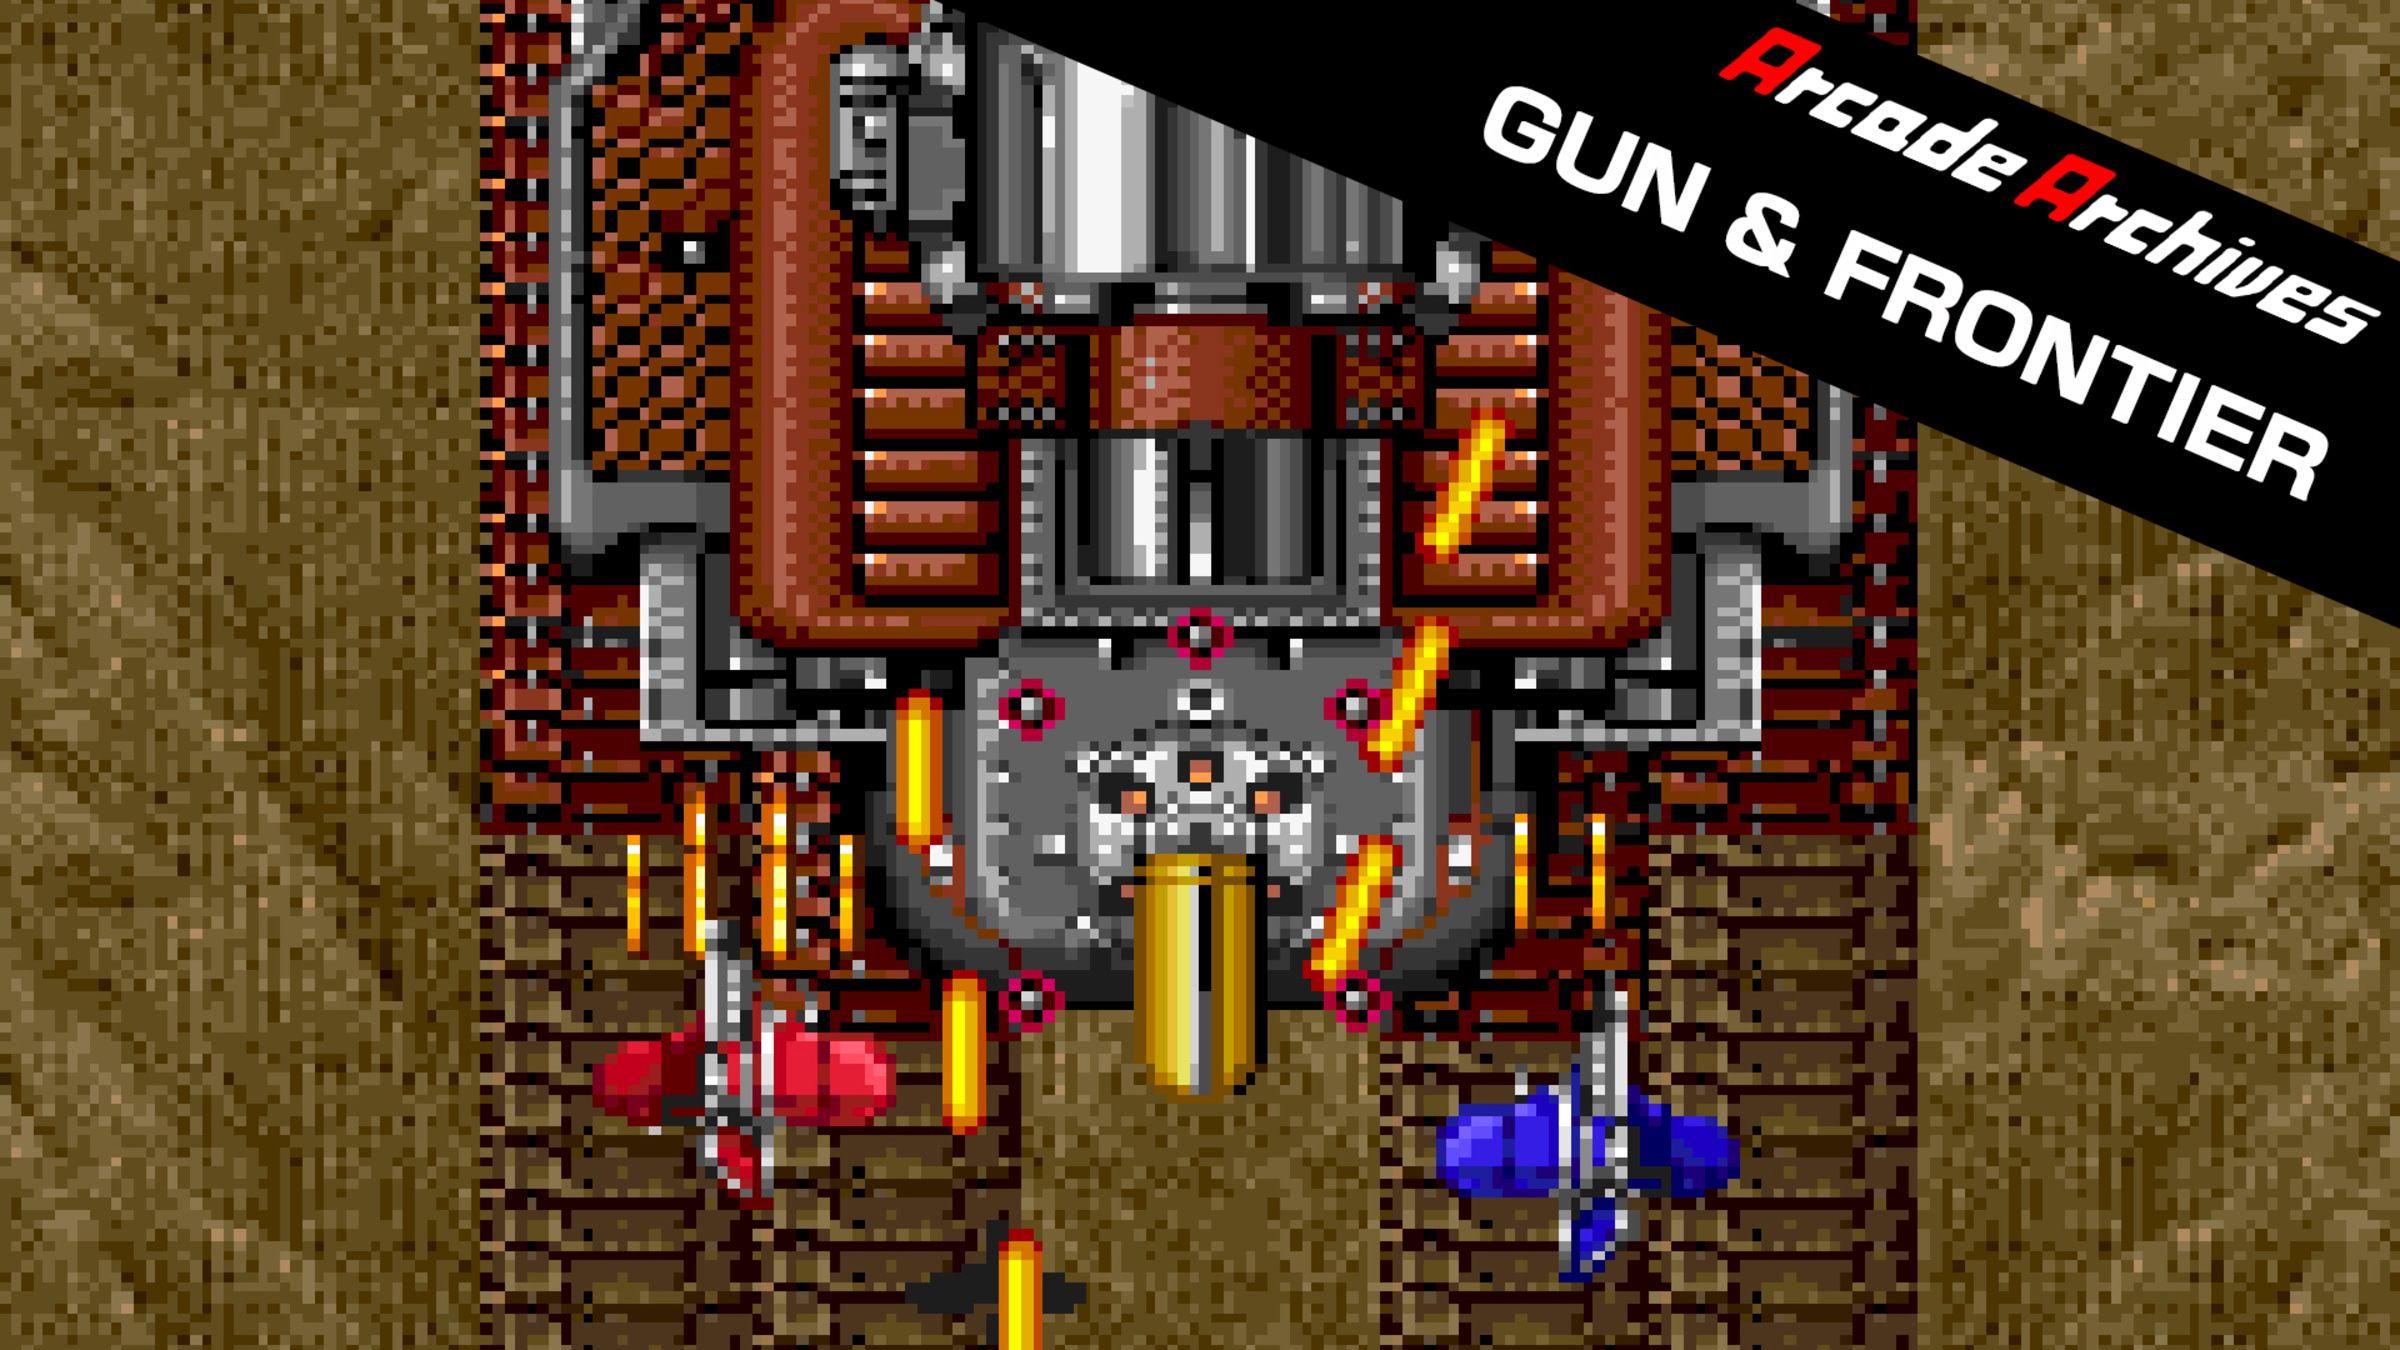 Arcade Archives GUN and FRONTIER for Nintendo Switch